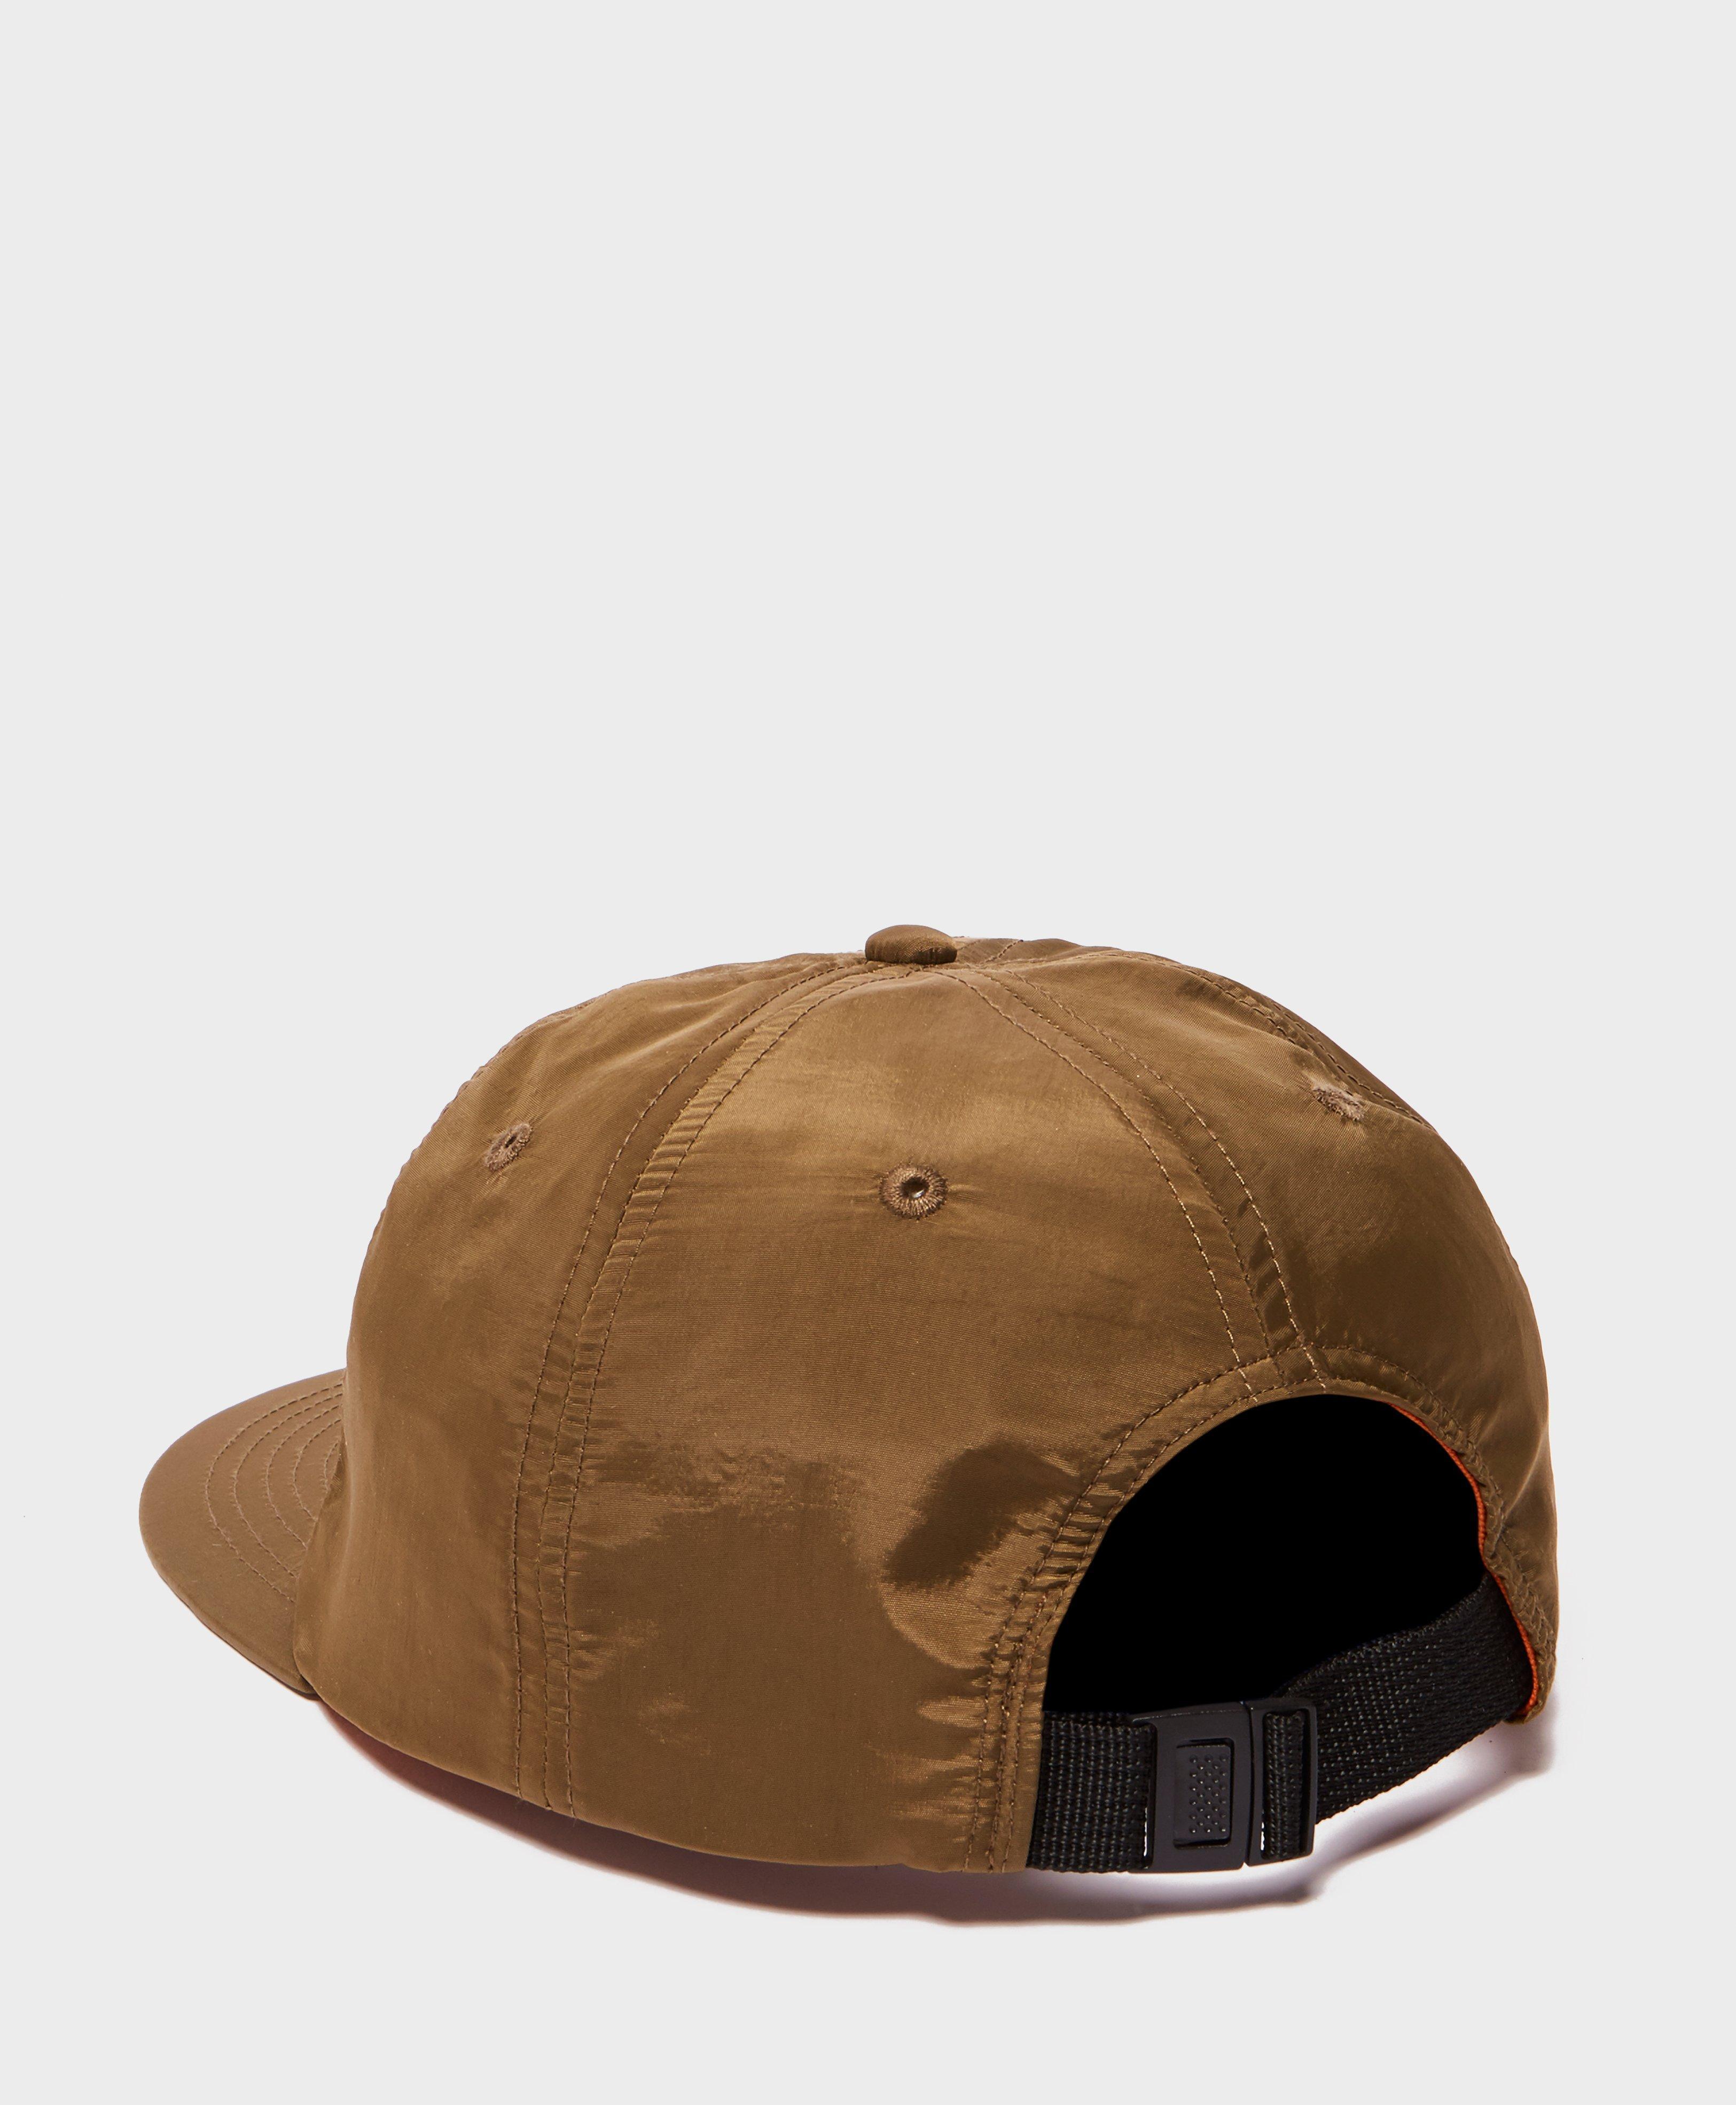 Barbour Synthetic Skateboard Cap in Brown for Men - Lyst